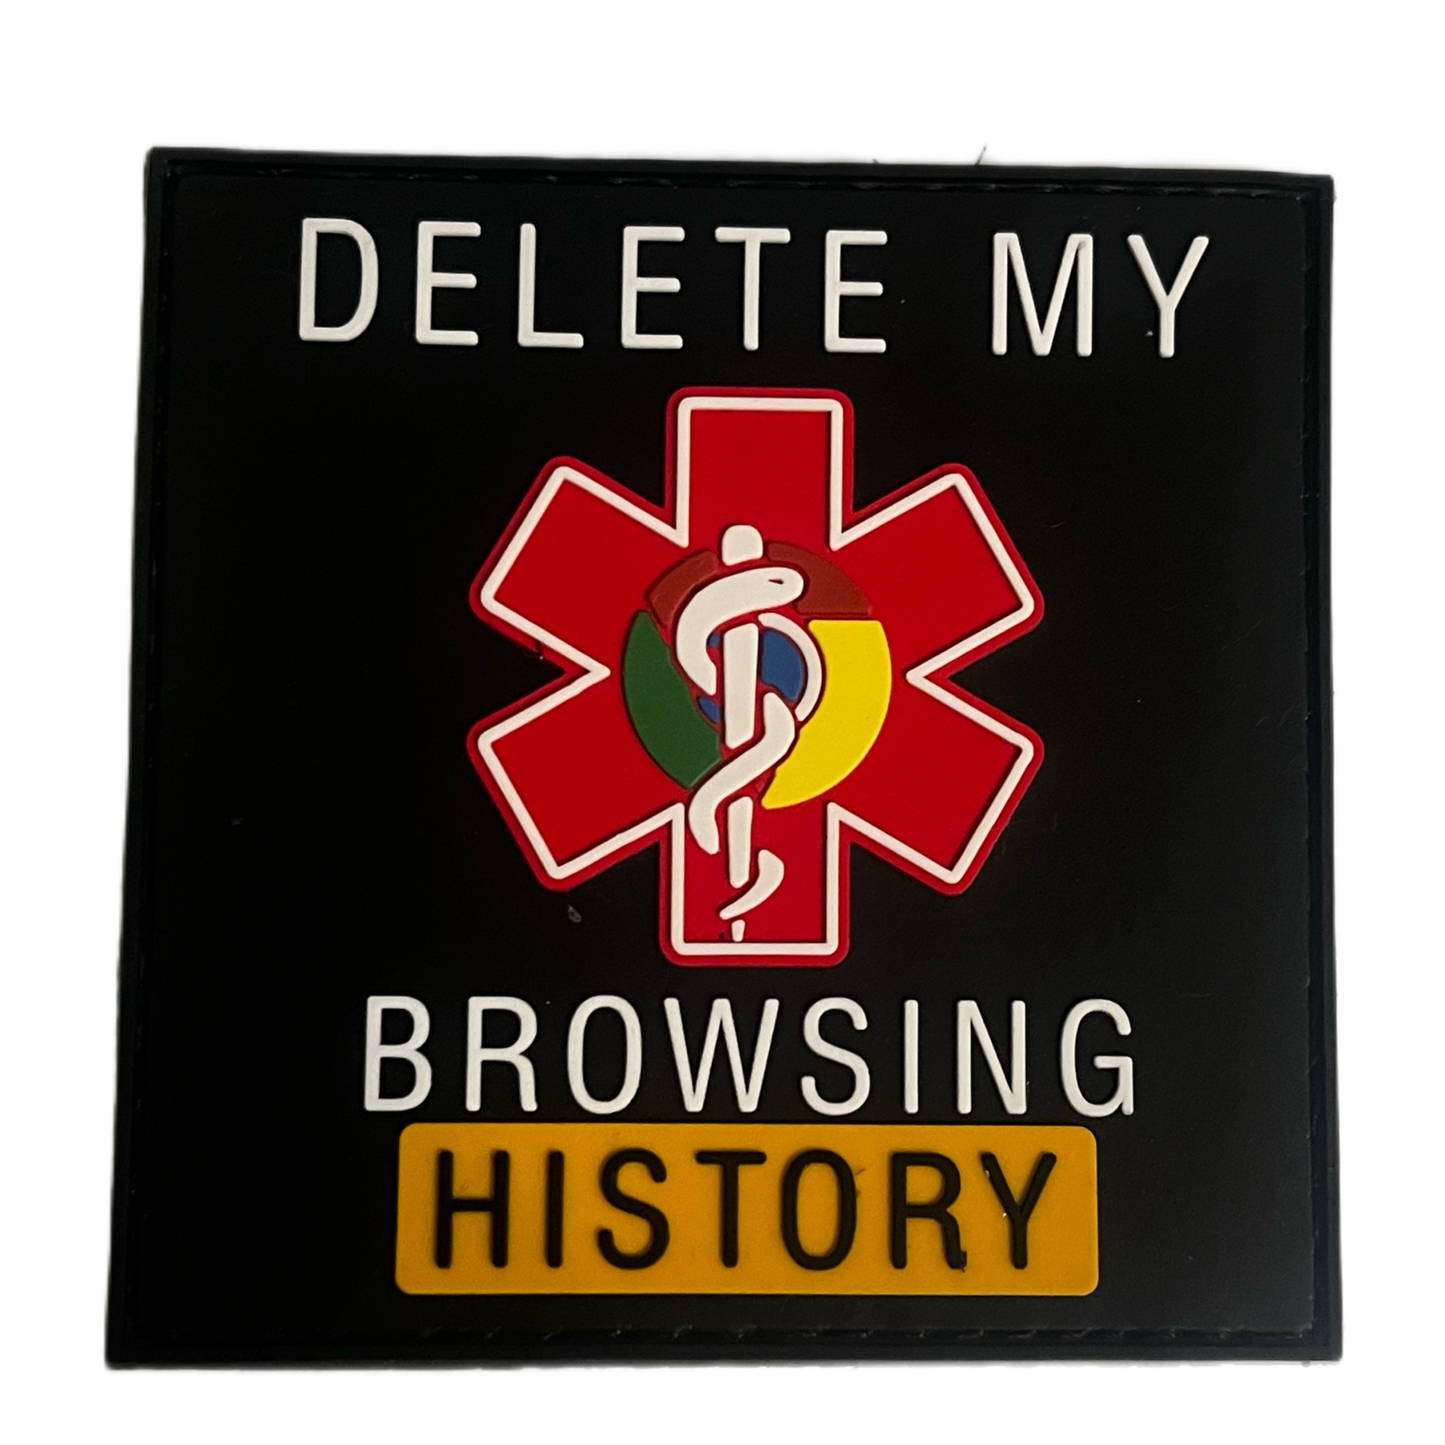 Delete My Browser History PVC Morale Patch